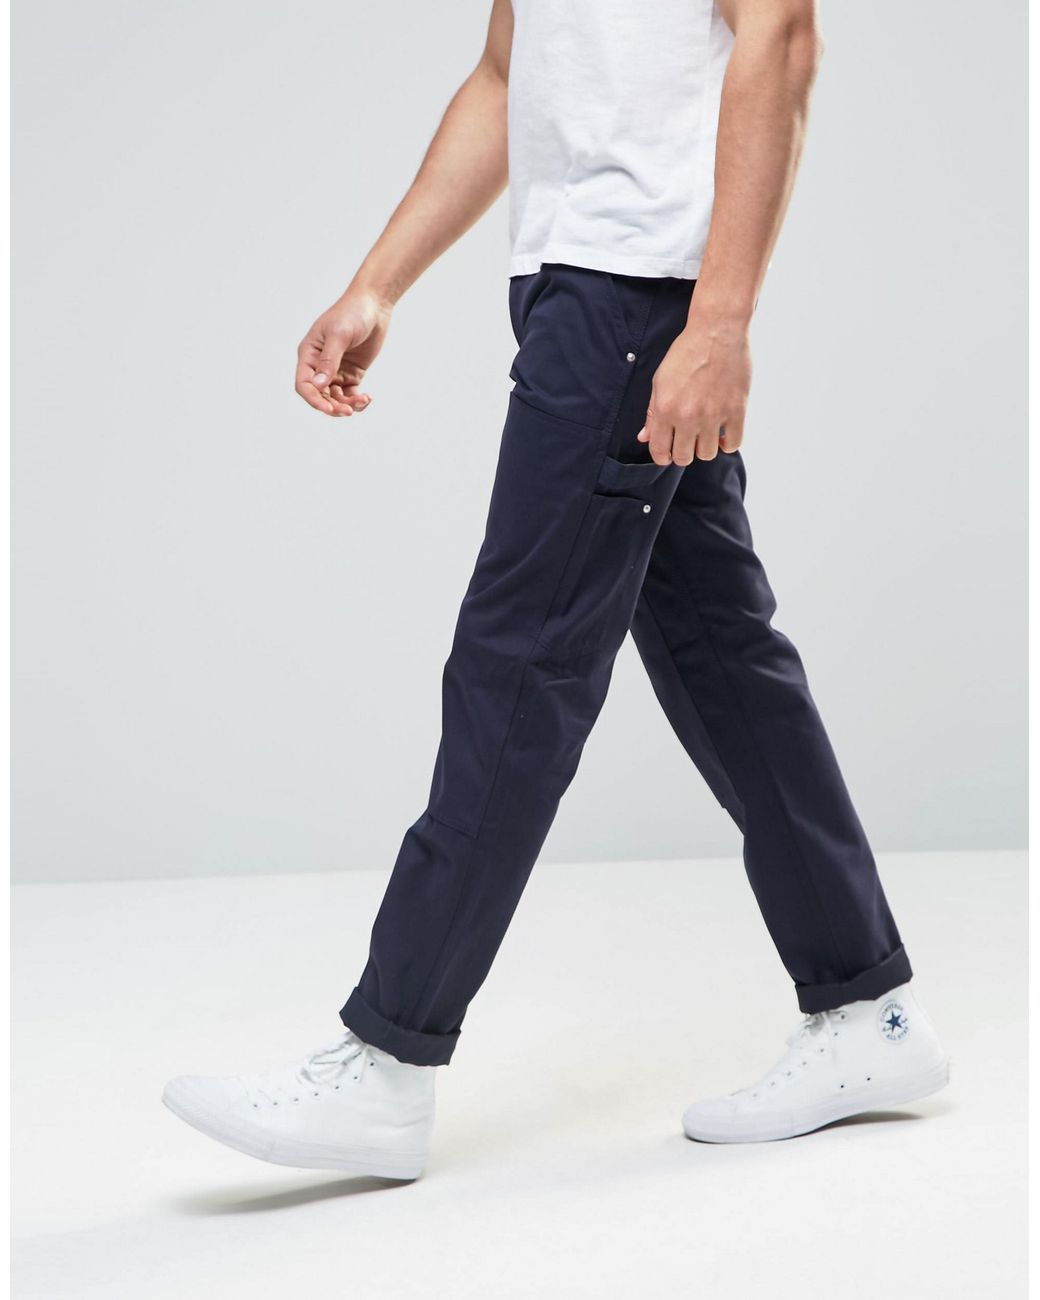 Carhartt WIP Lincoln Double Knee Pant in Blue for Men | Lyst